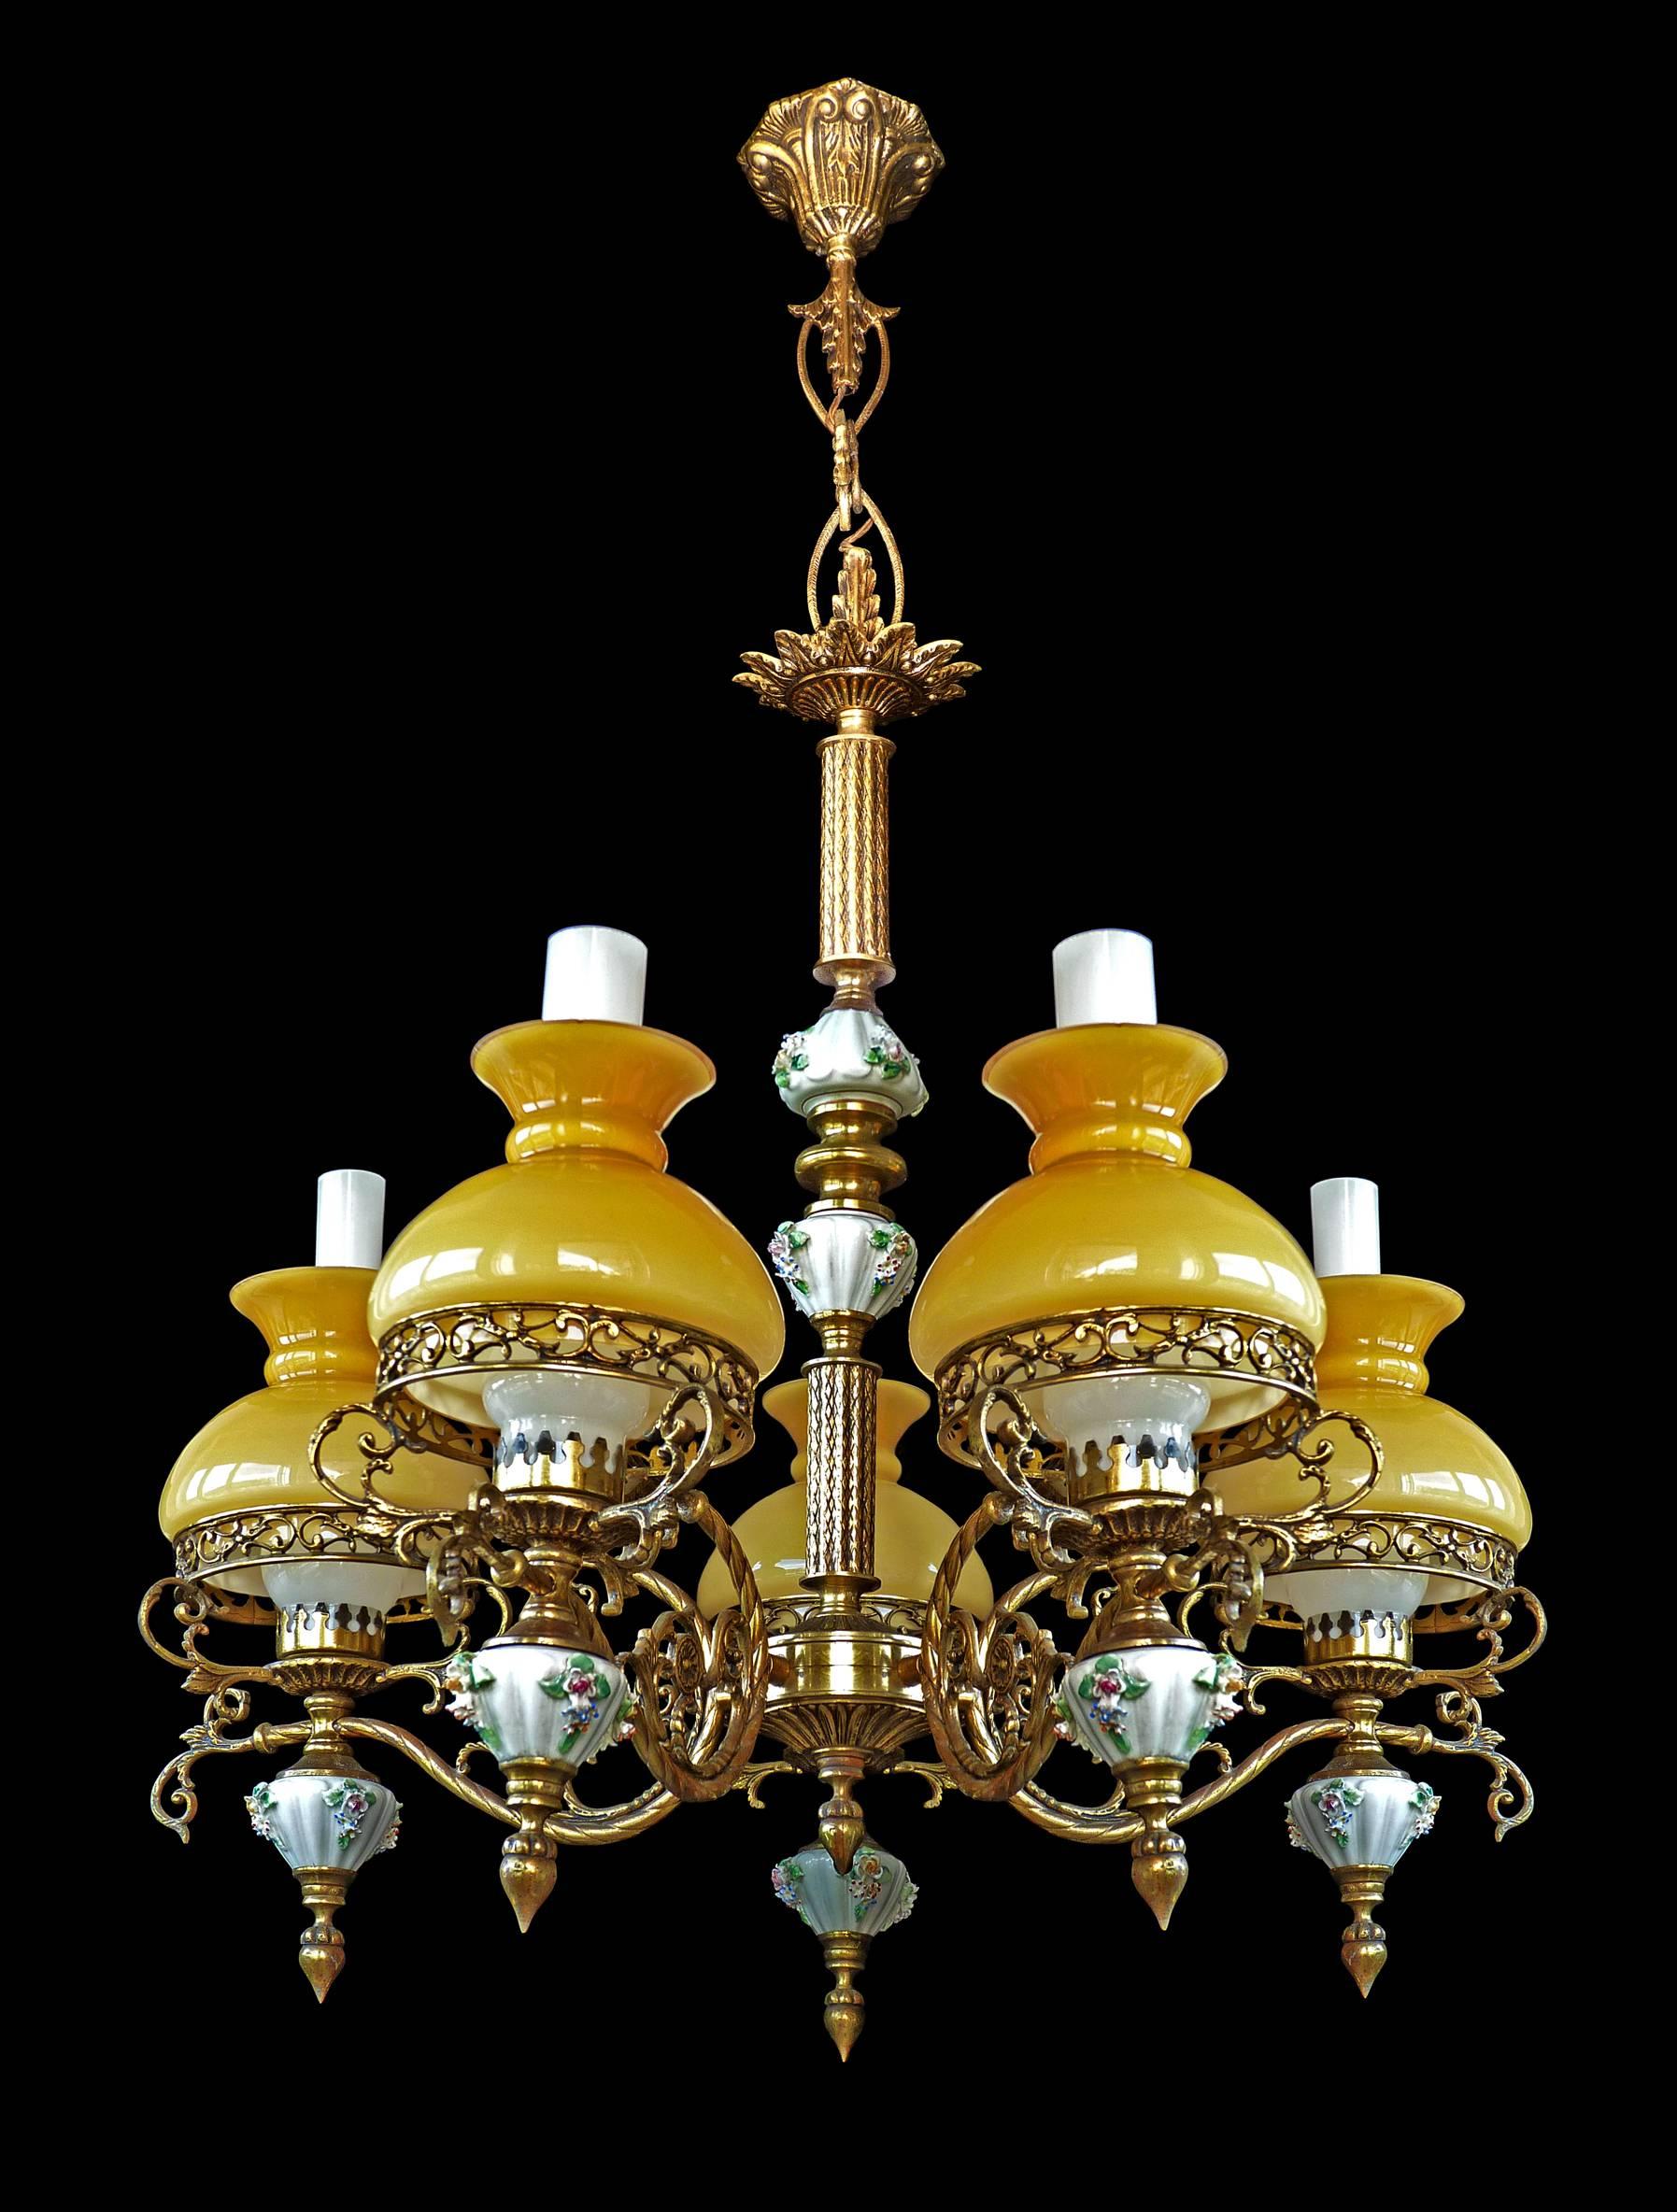 Early Victorian Amber French Limoges Porcelain Gilt Bronze Victorian Library Oil Lamp Chandelier